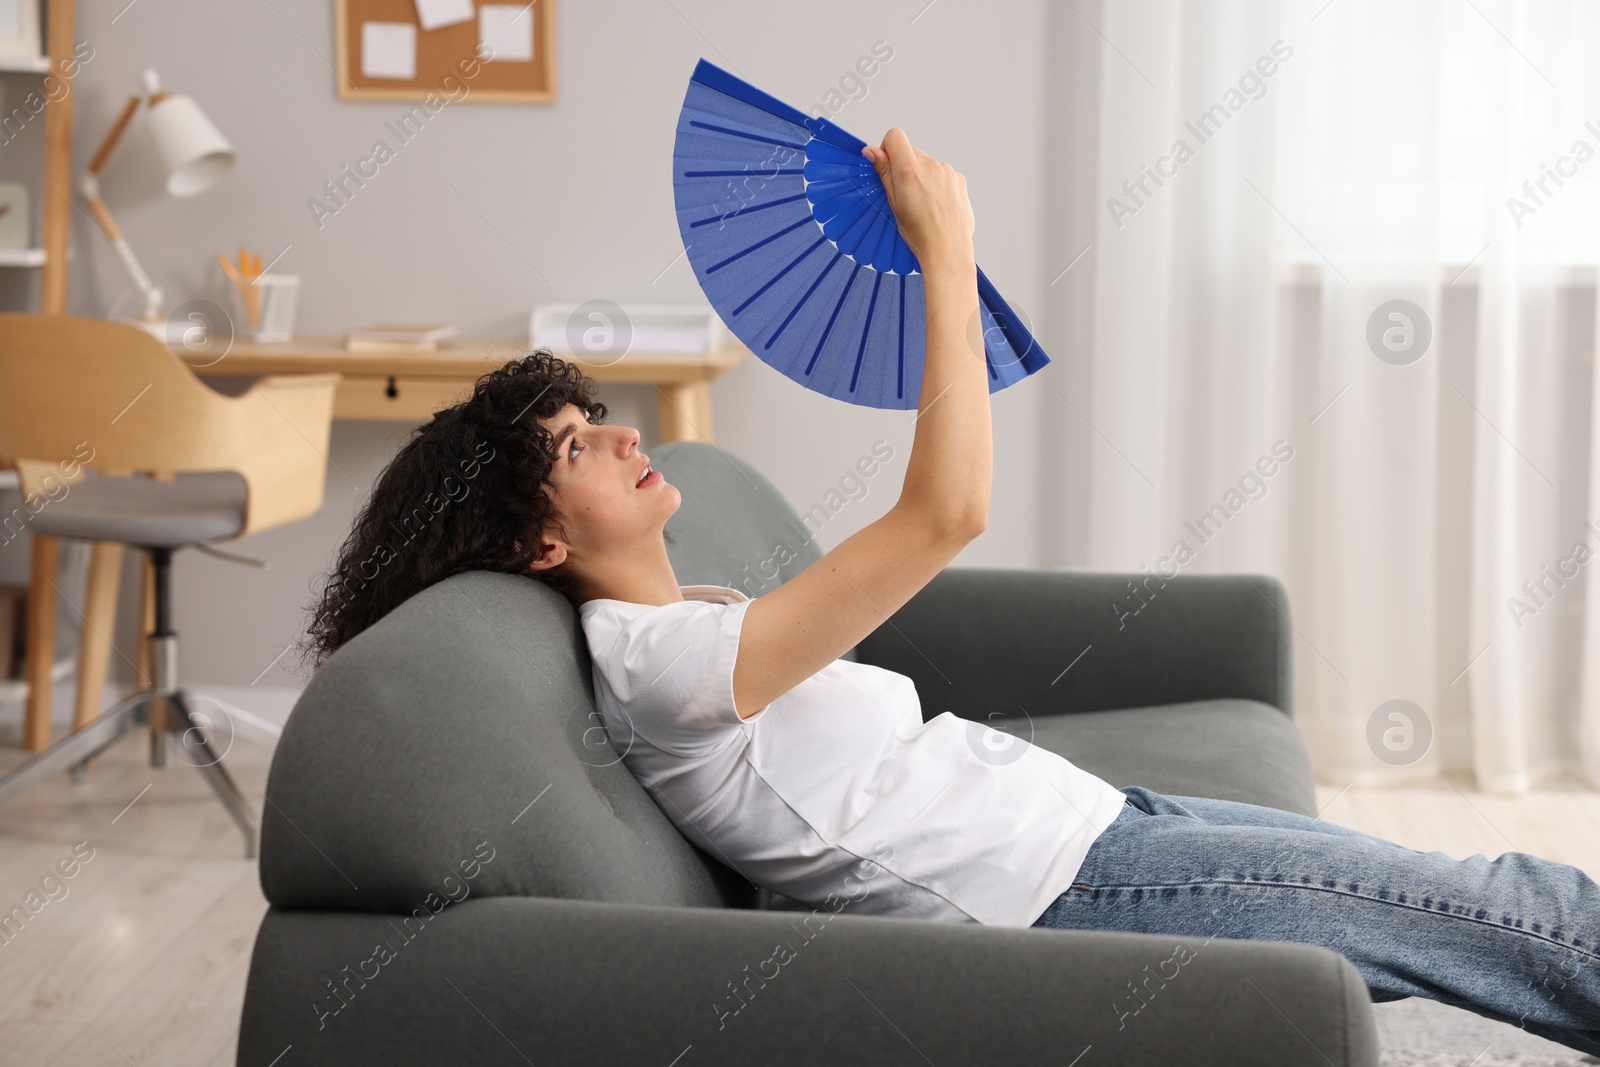 Photo of Young woman waving blue hand fan to cool herself on sofa at home